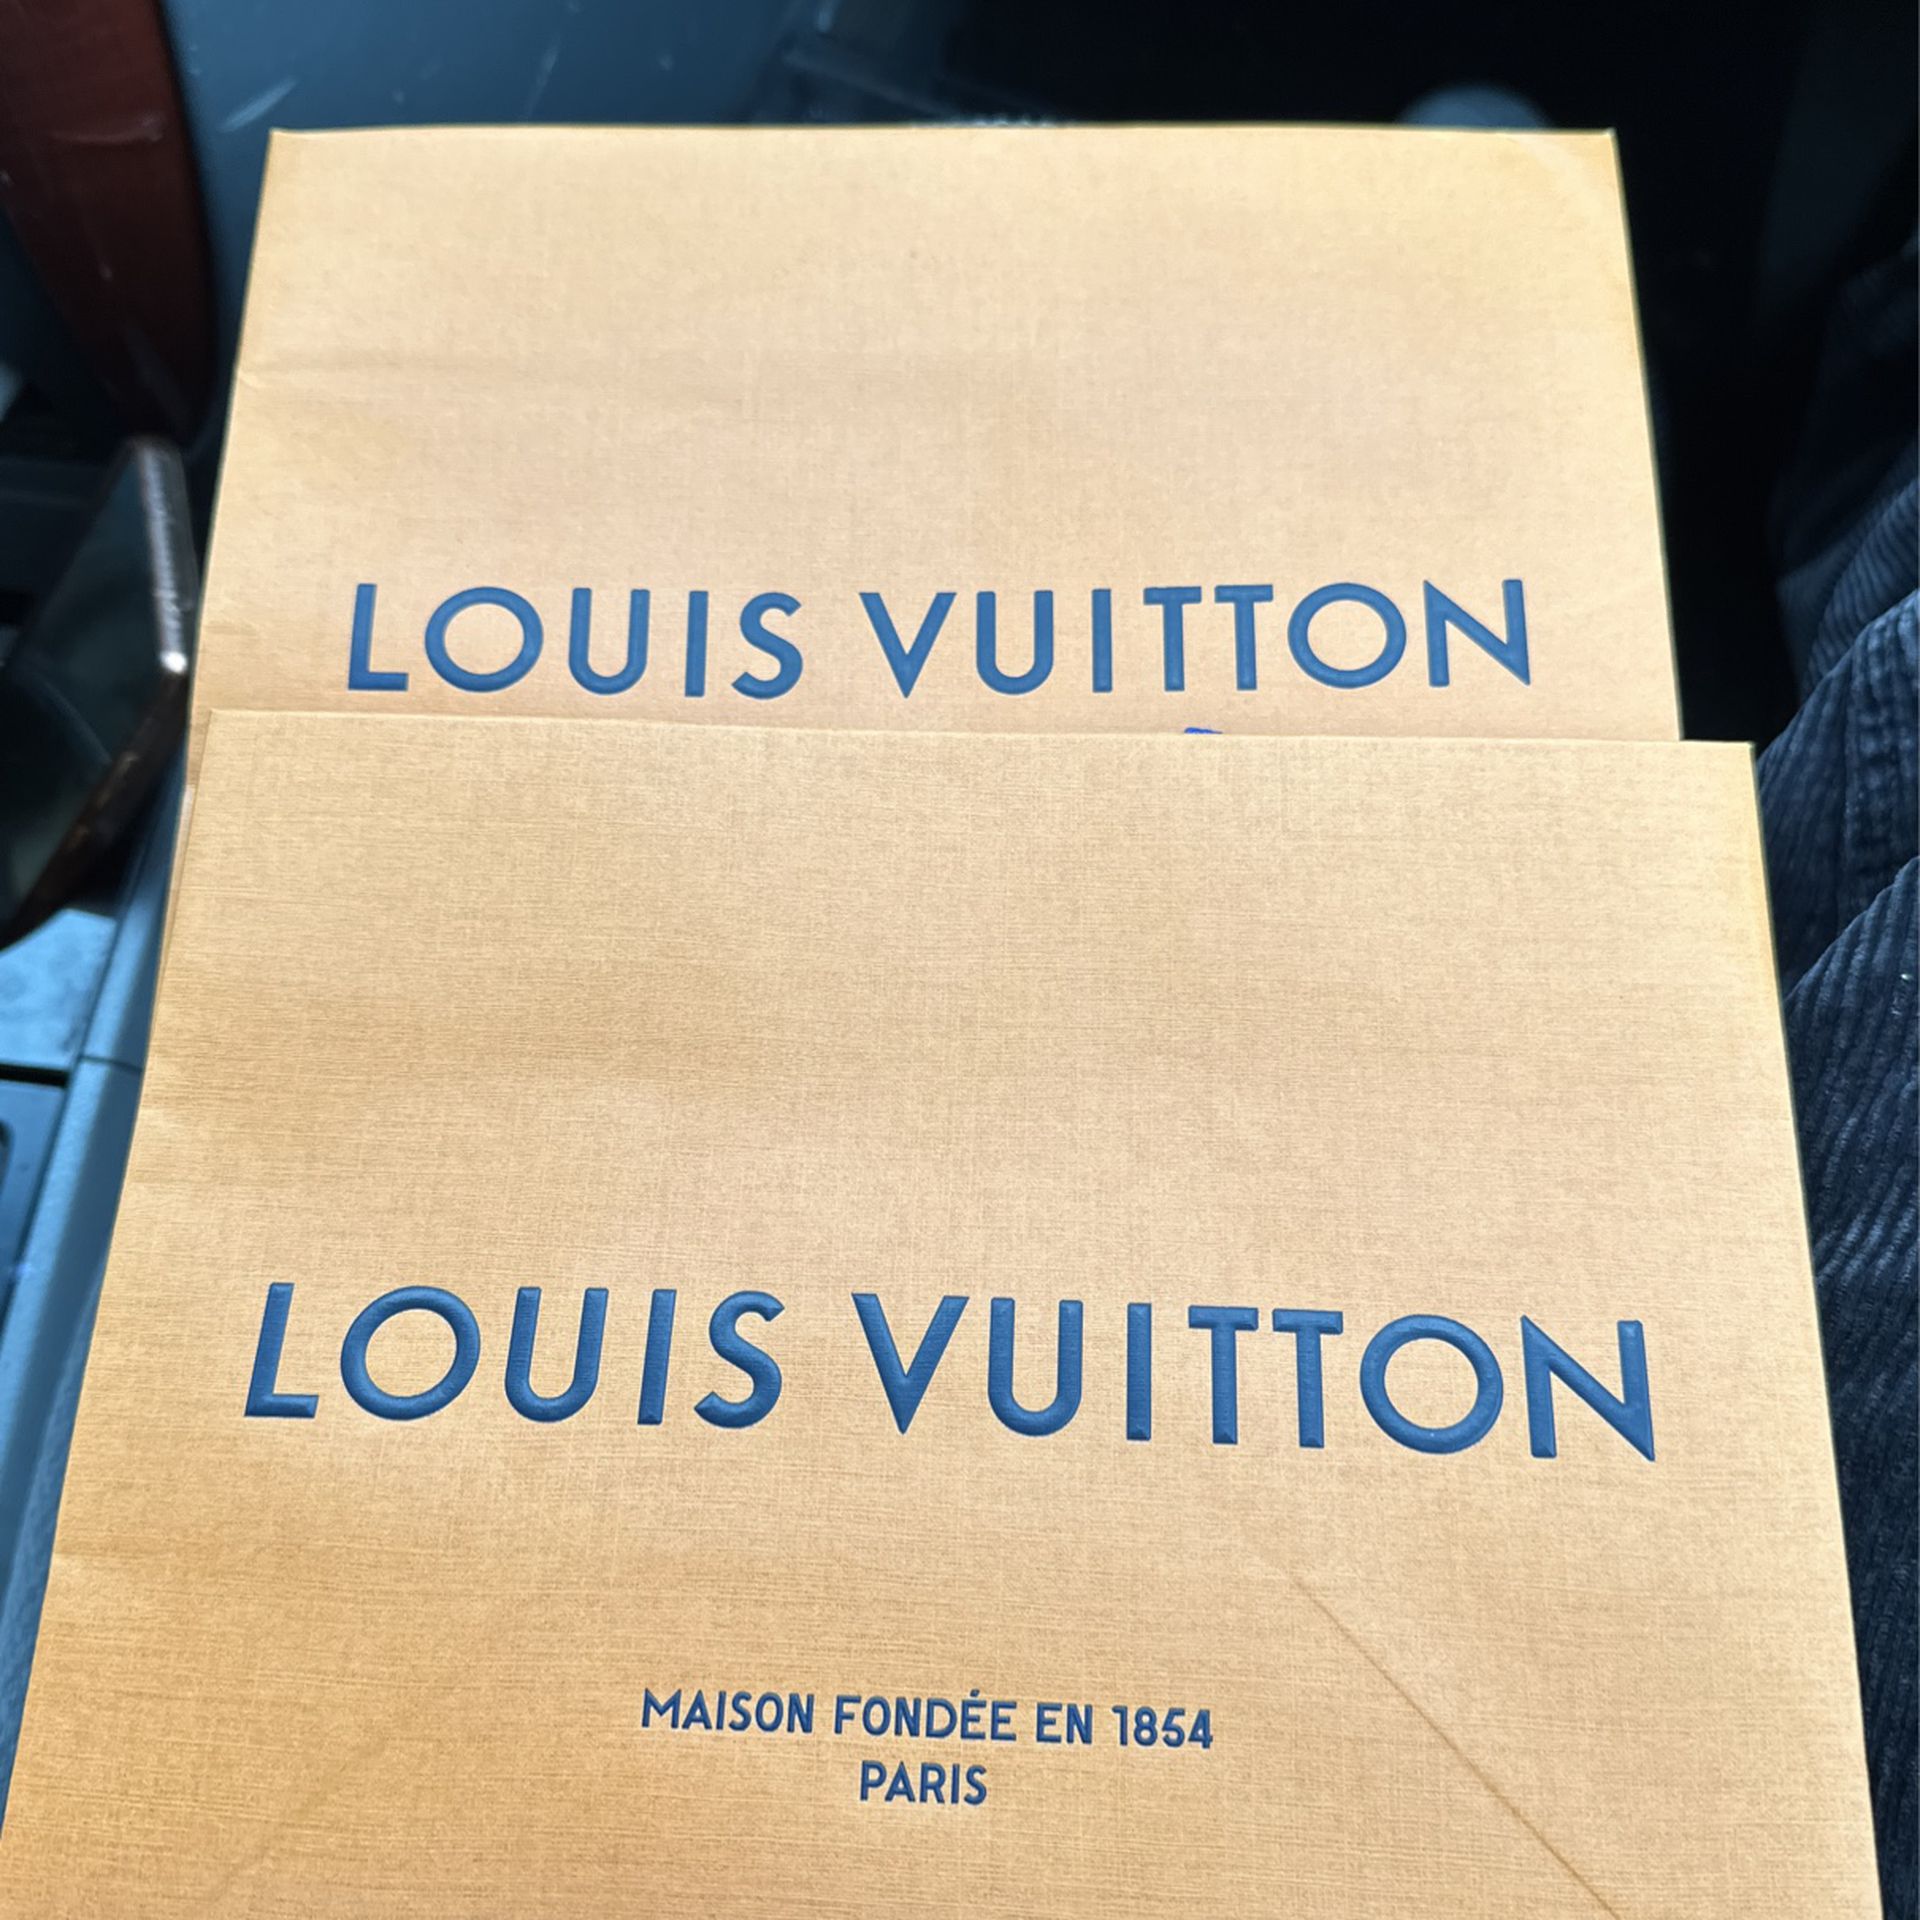 LV Gift Box Set for Sale in San Diego, CA - OfferUp